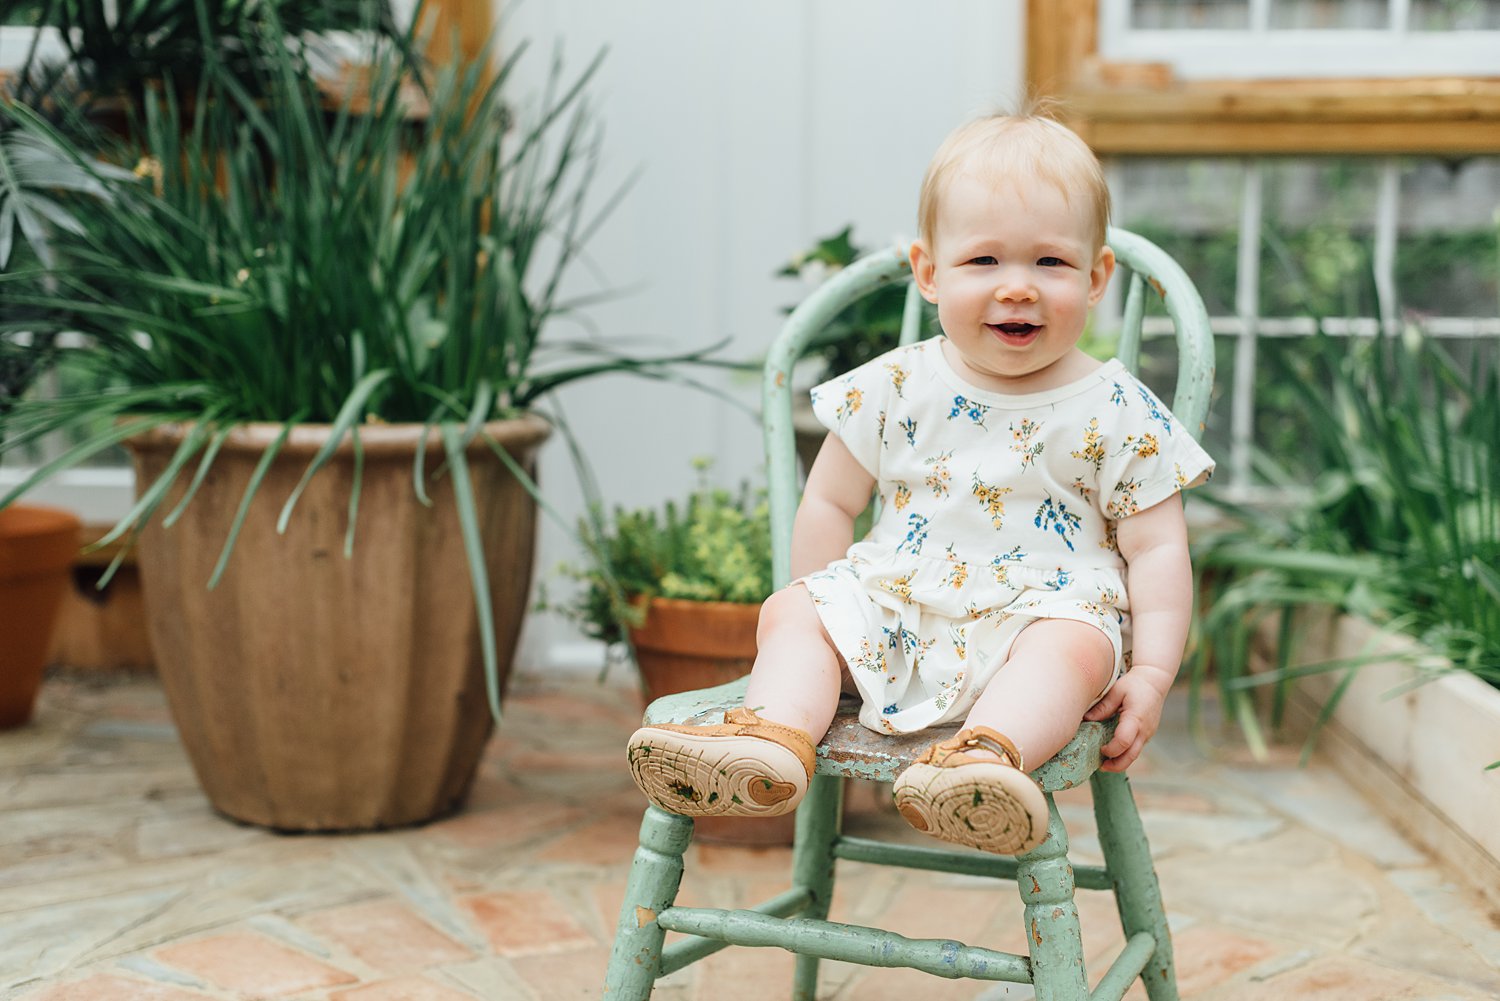 Taproot Greenhouse West Chester Mini-Sessions - Montgomery County Maryland Family Photographer - Alison Dunn Photography photo